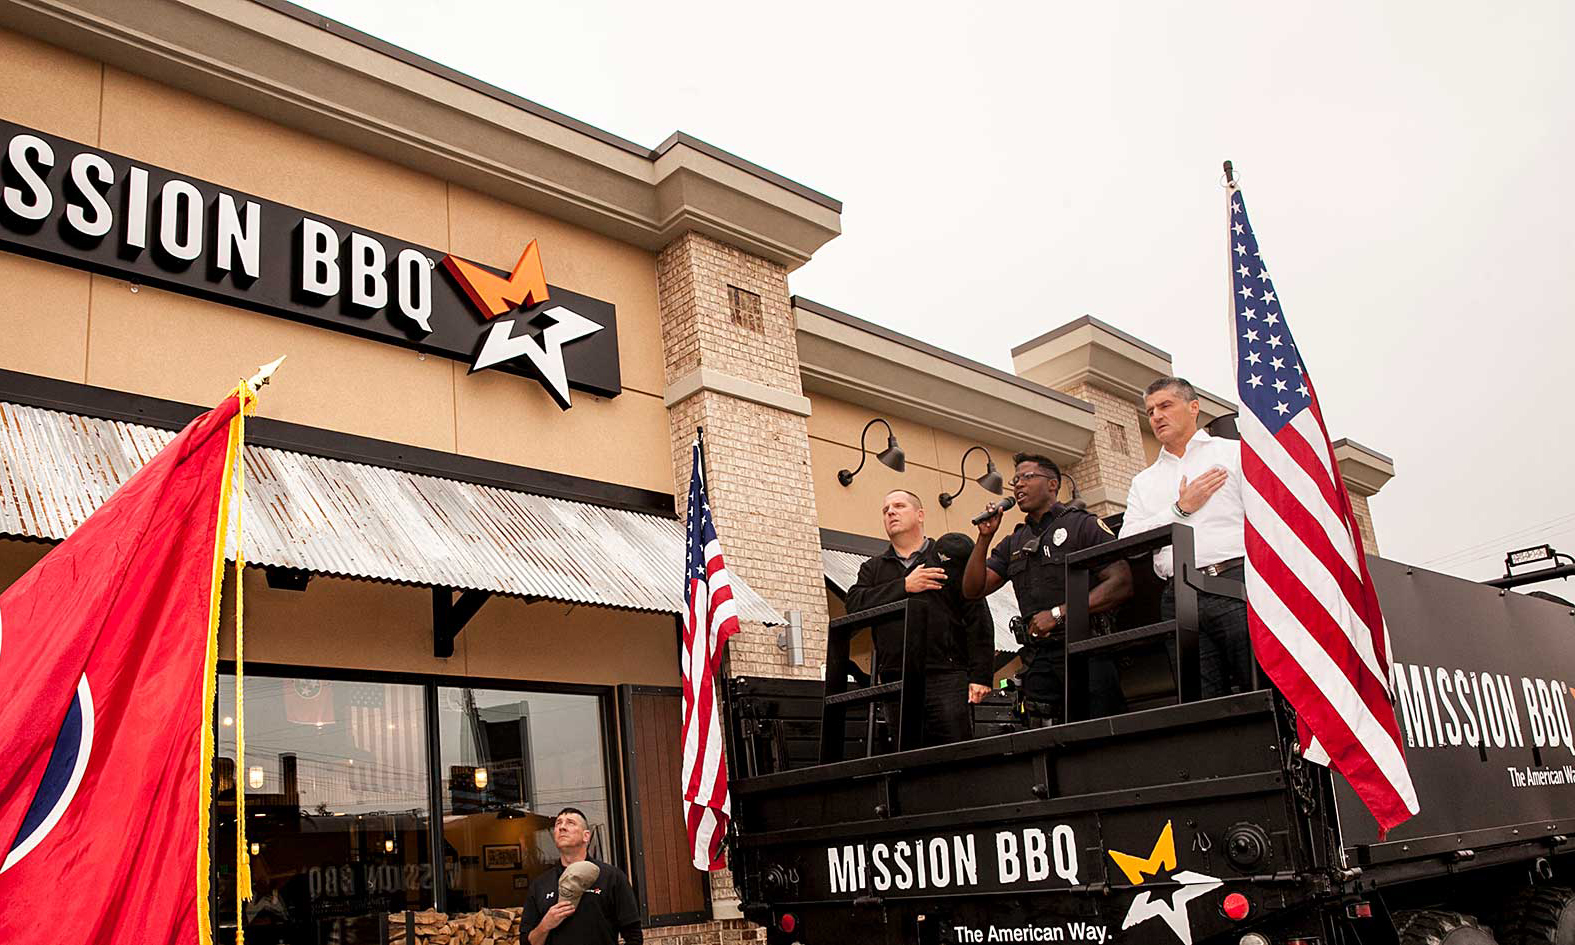 Special BBQ Joint Proudly Serving Those Who Serve